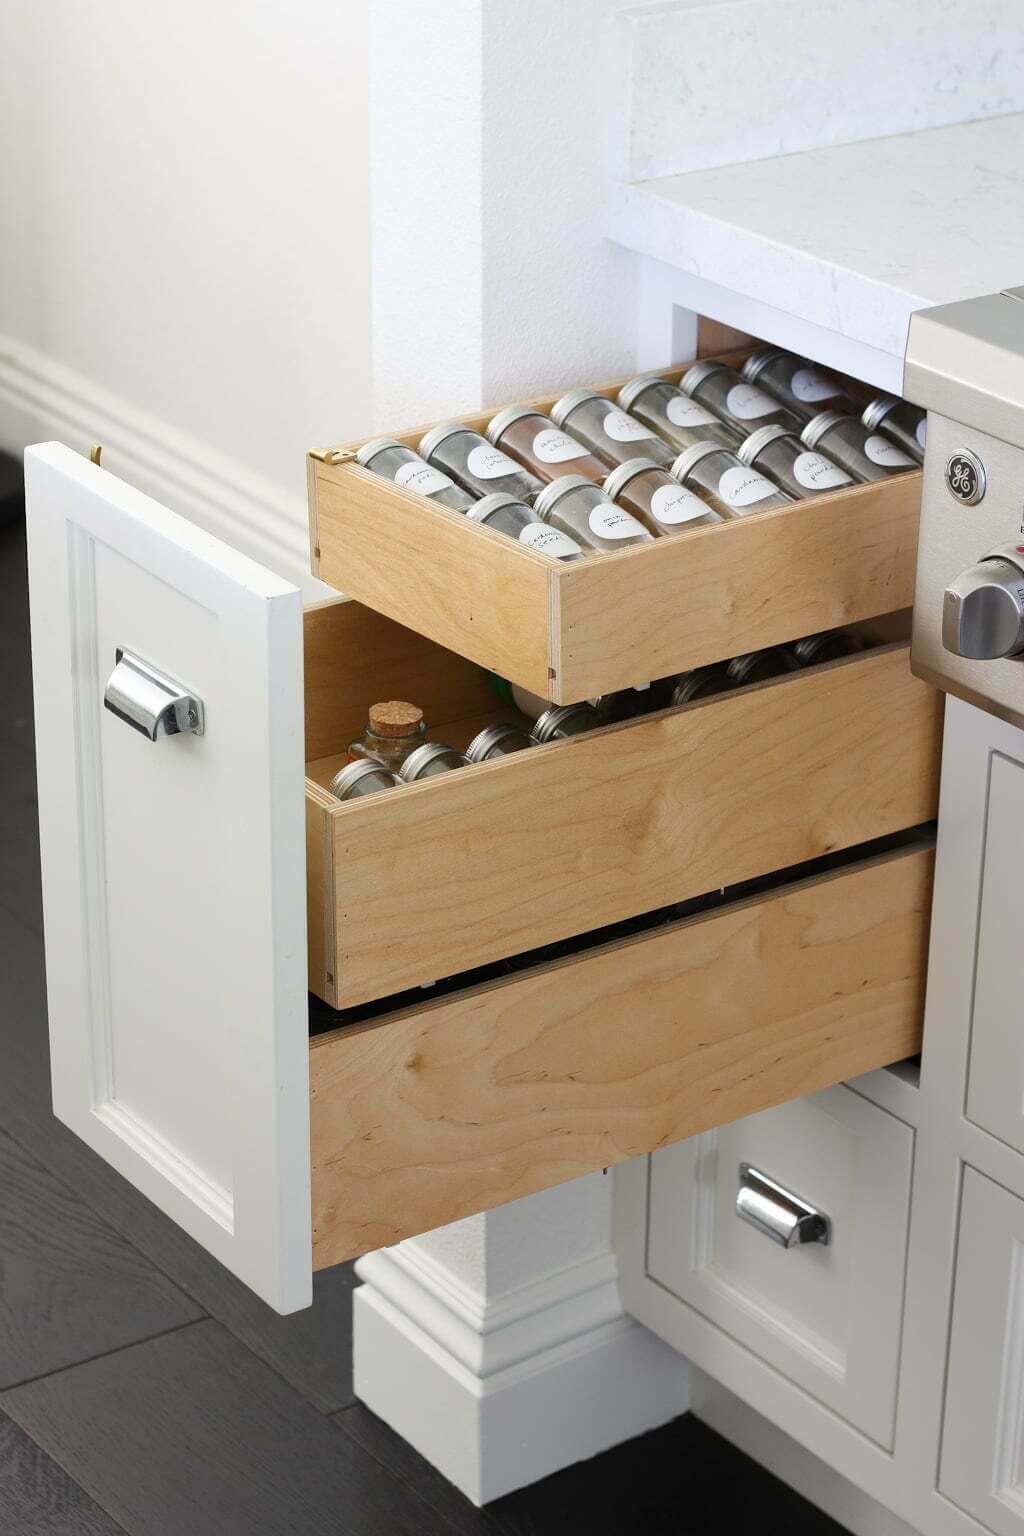 organized spice drawer in kitchen, with three levels, top drawer open